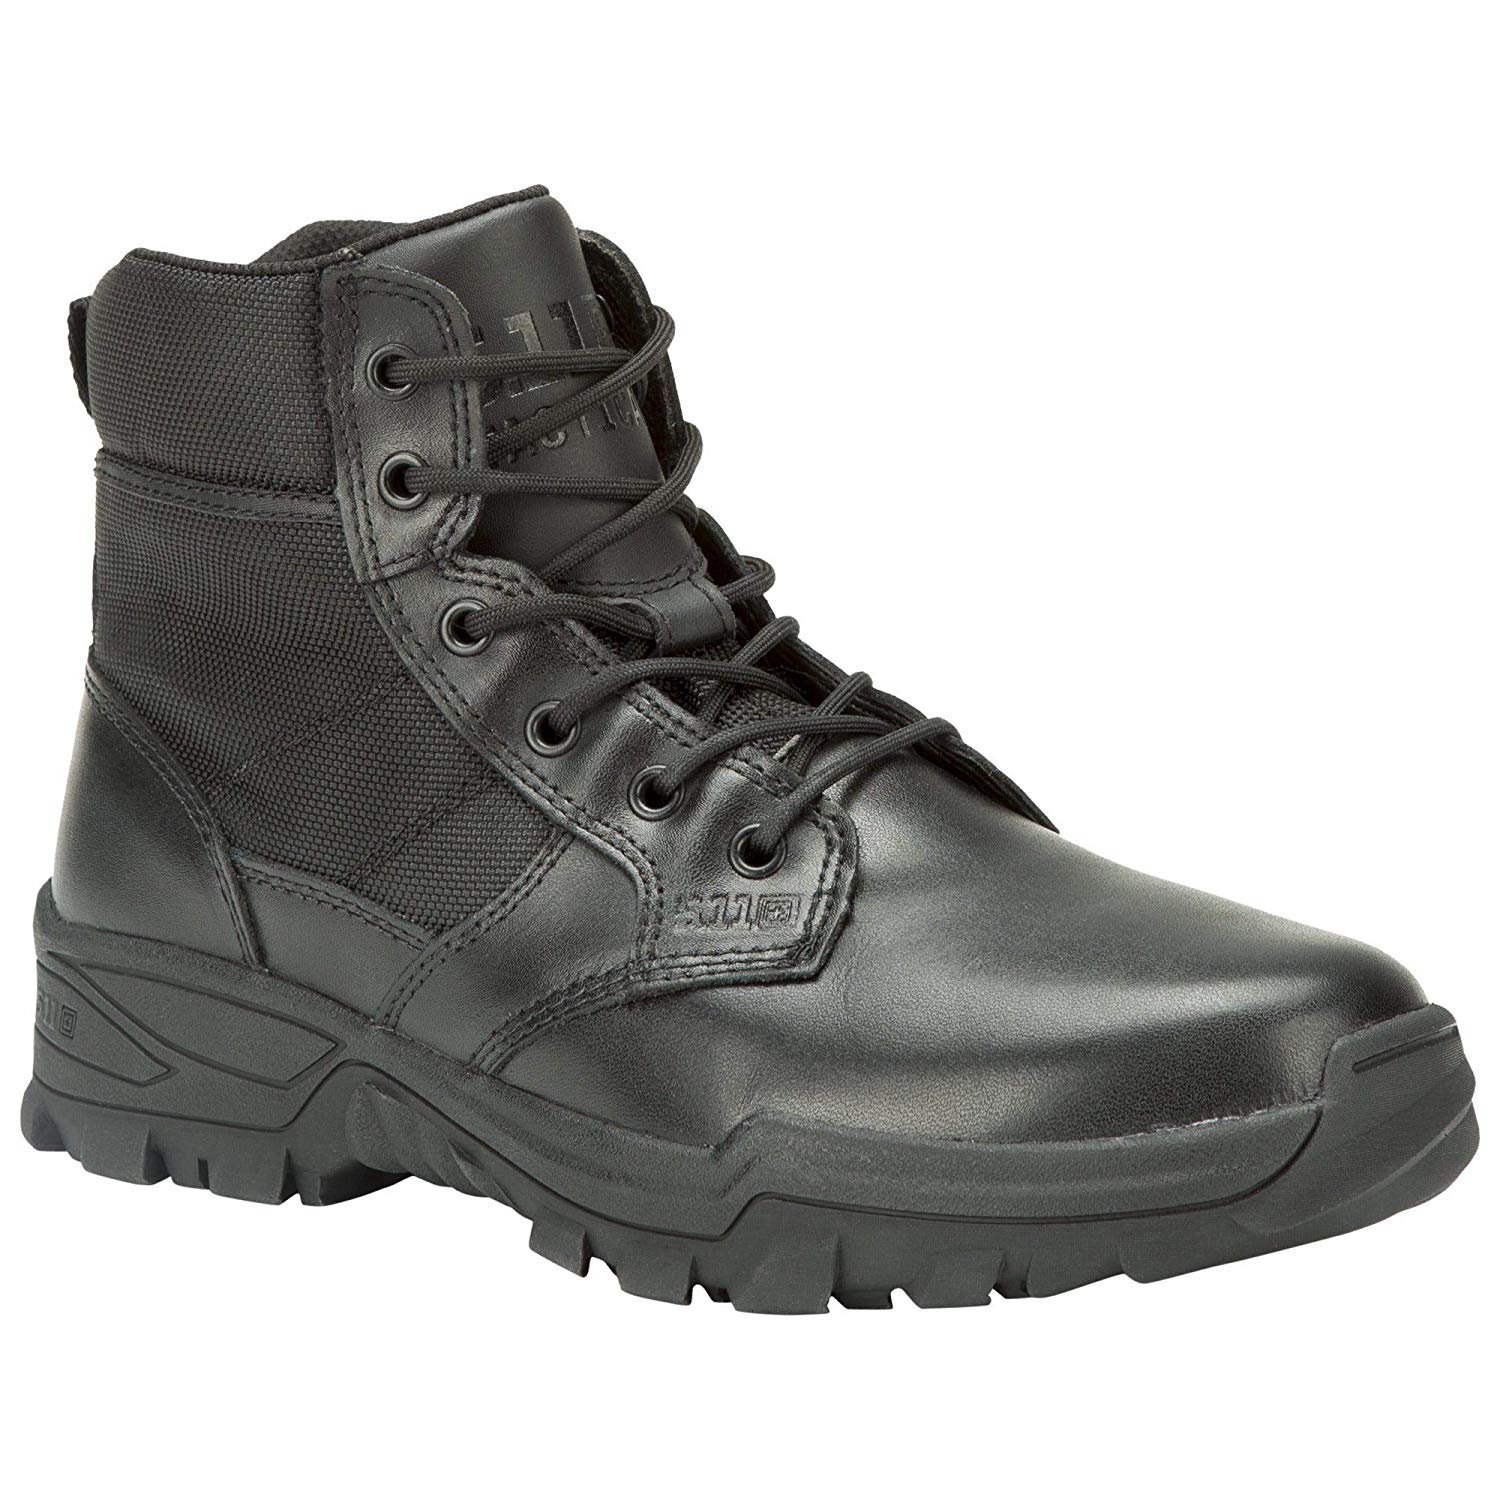 5.11 Tactical Men's Speed 3.0 5Inch Boots, Oil/SlipResistant, Style